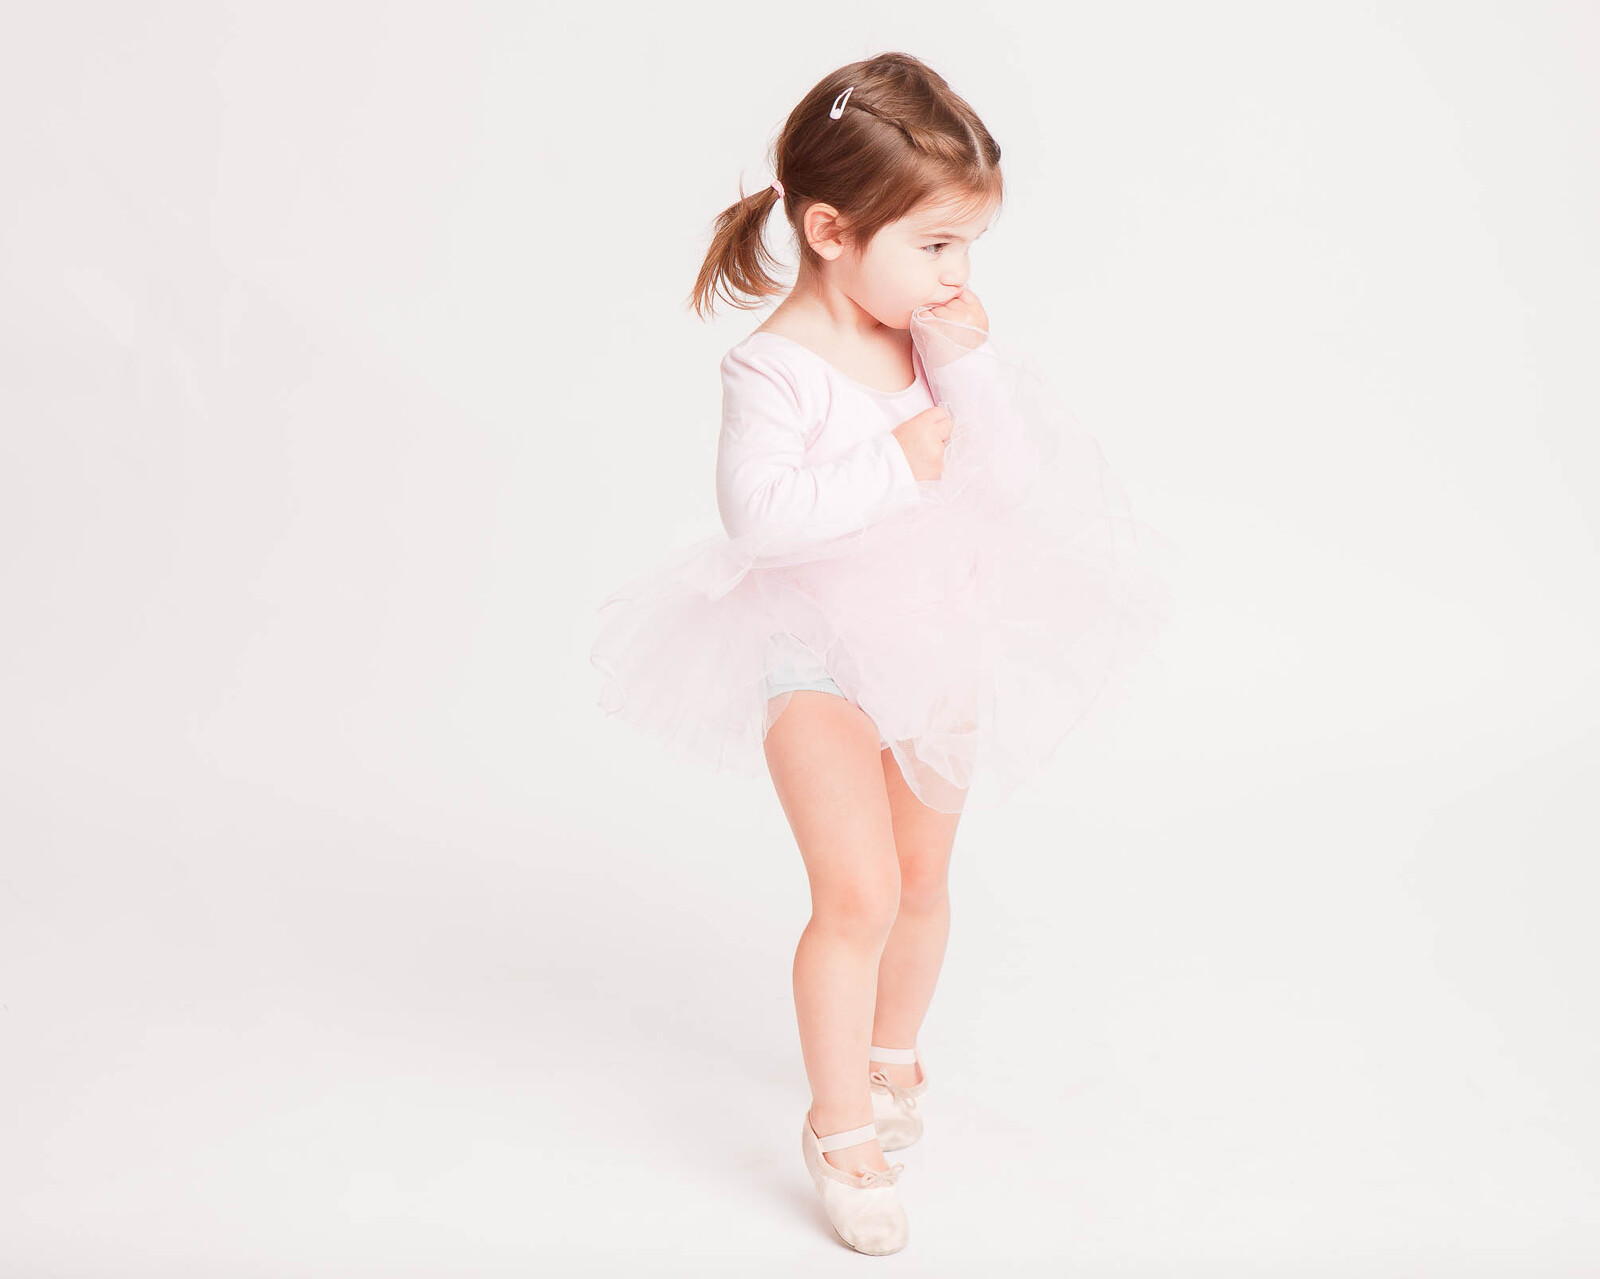 baby ballerina studio photography with white background and pink tutu shot by petite feet photography, children London photographer in Woodford, West Essex.